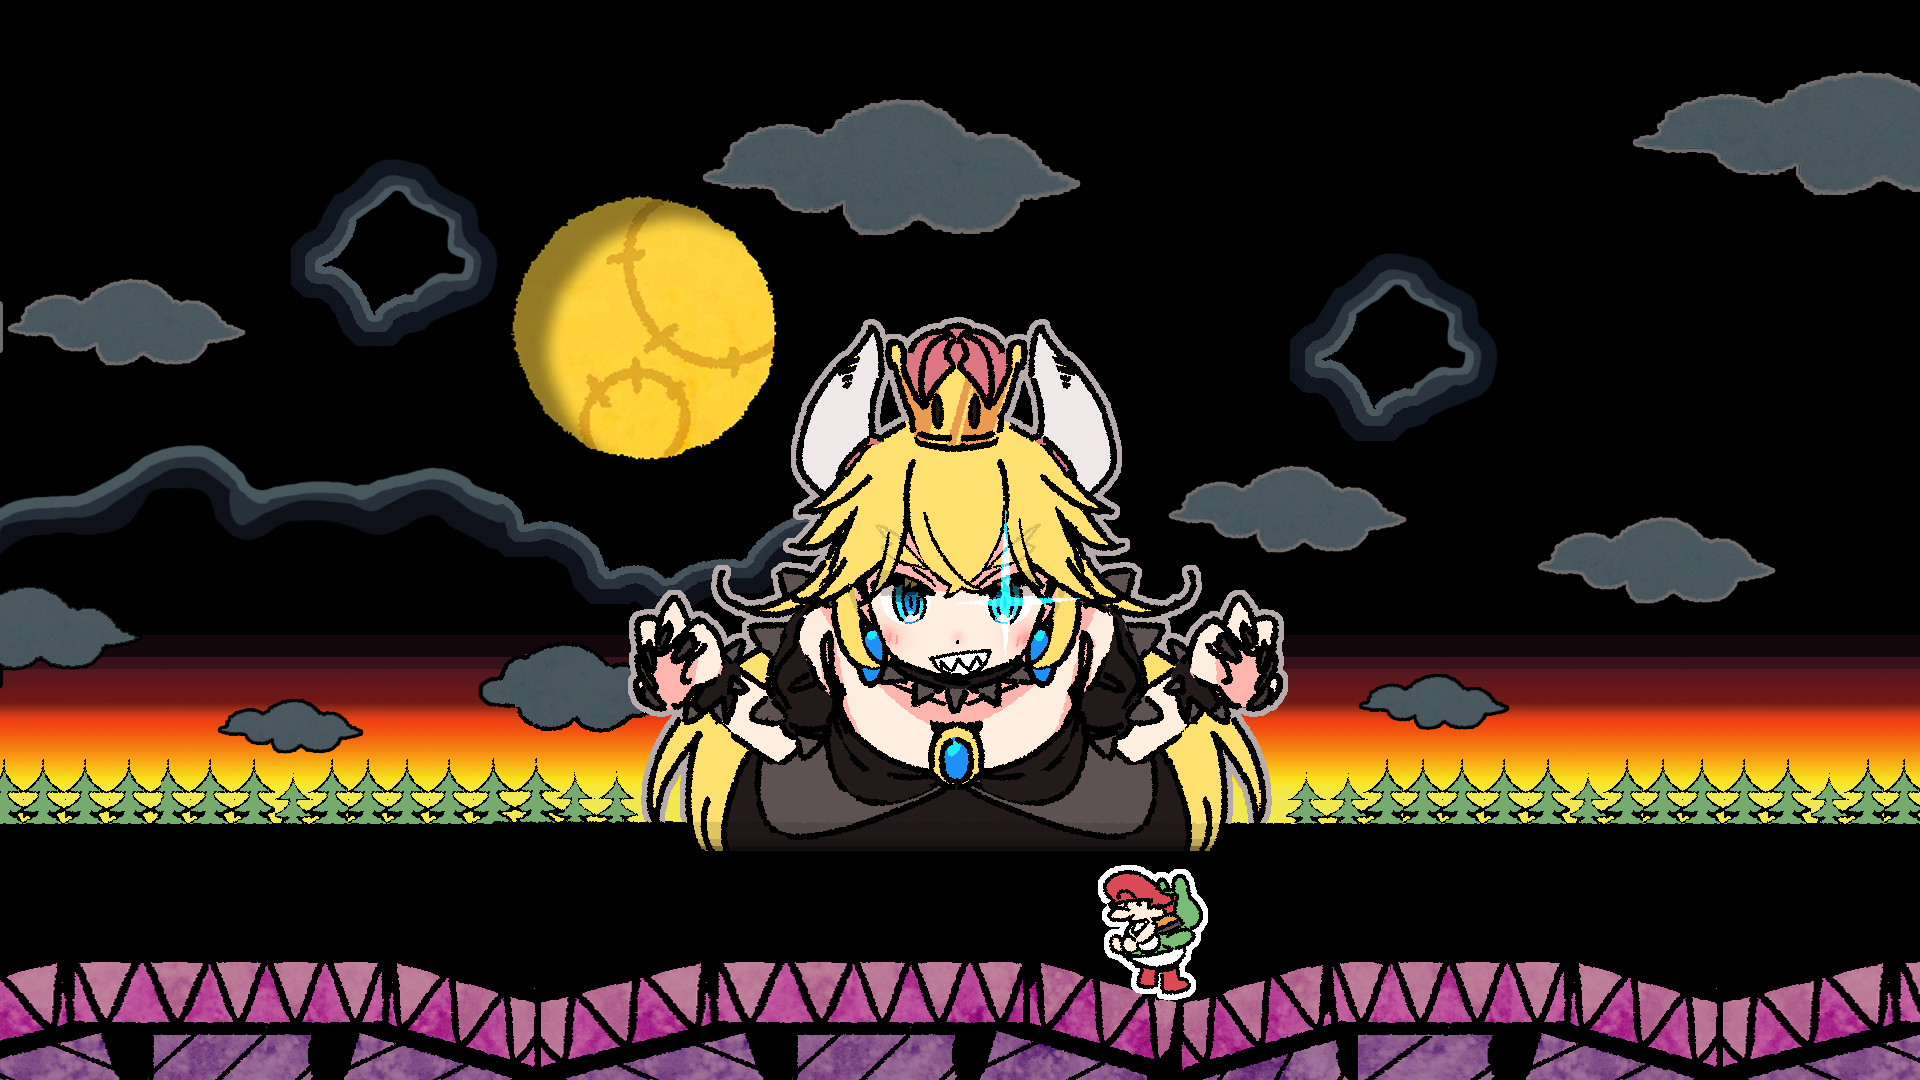 1920x1080 Tags: Anime, Super Mario Bros., Bowser, Bowsette, Fan Character,